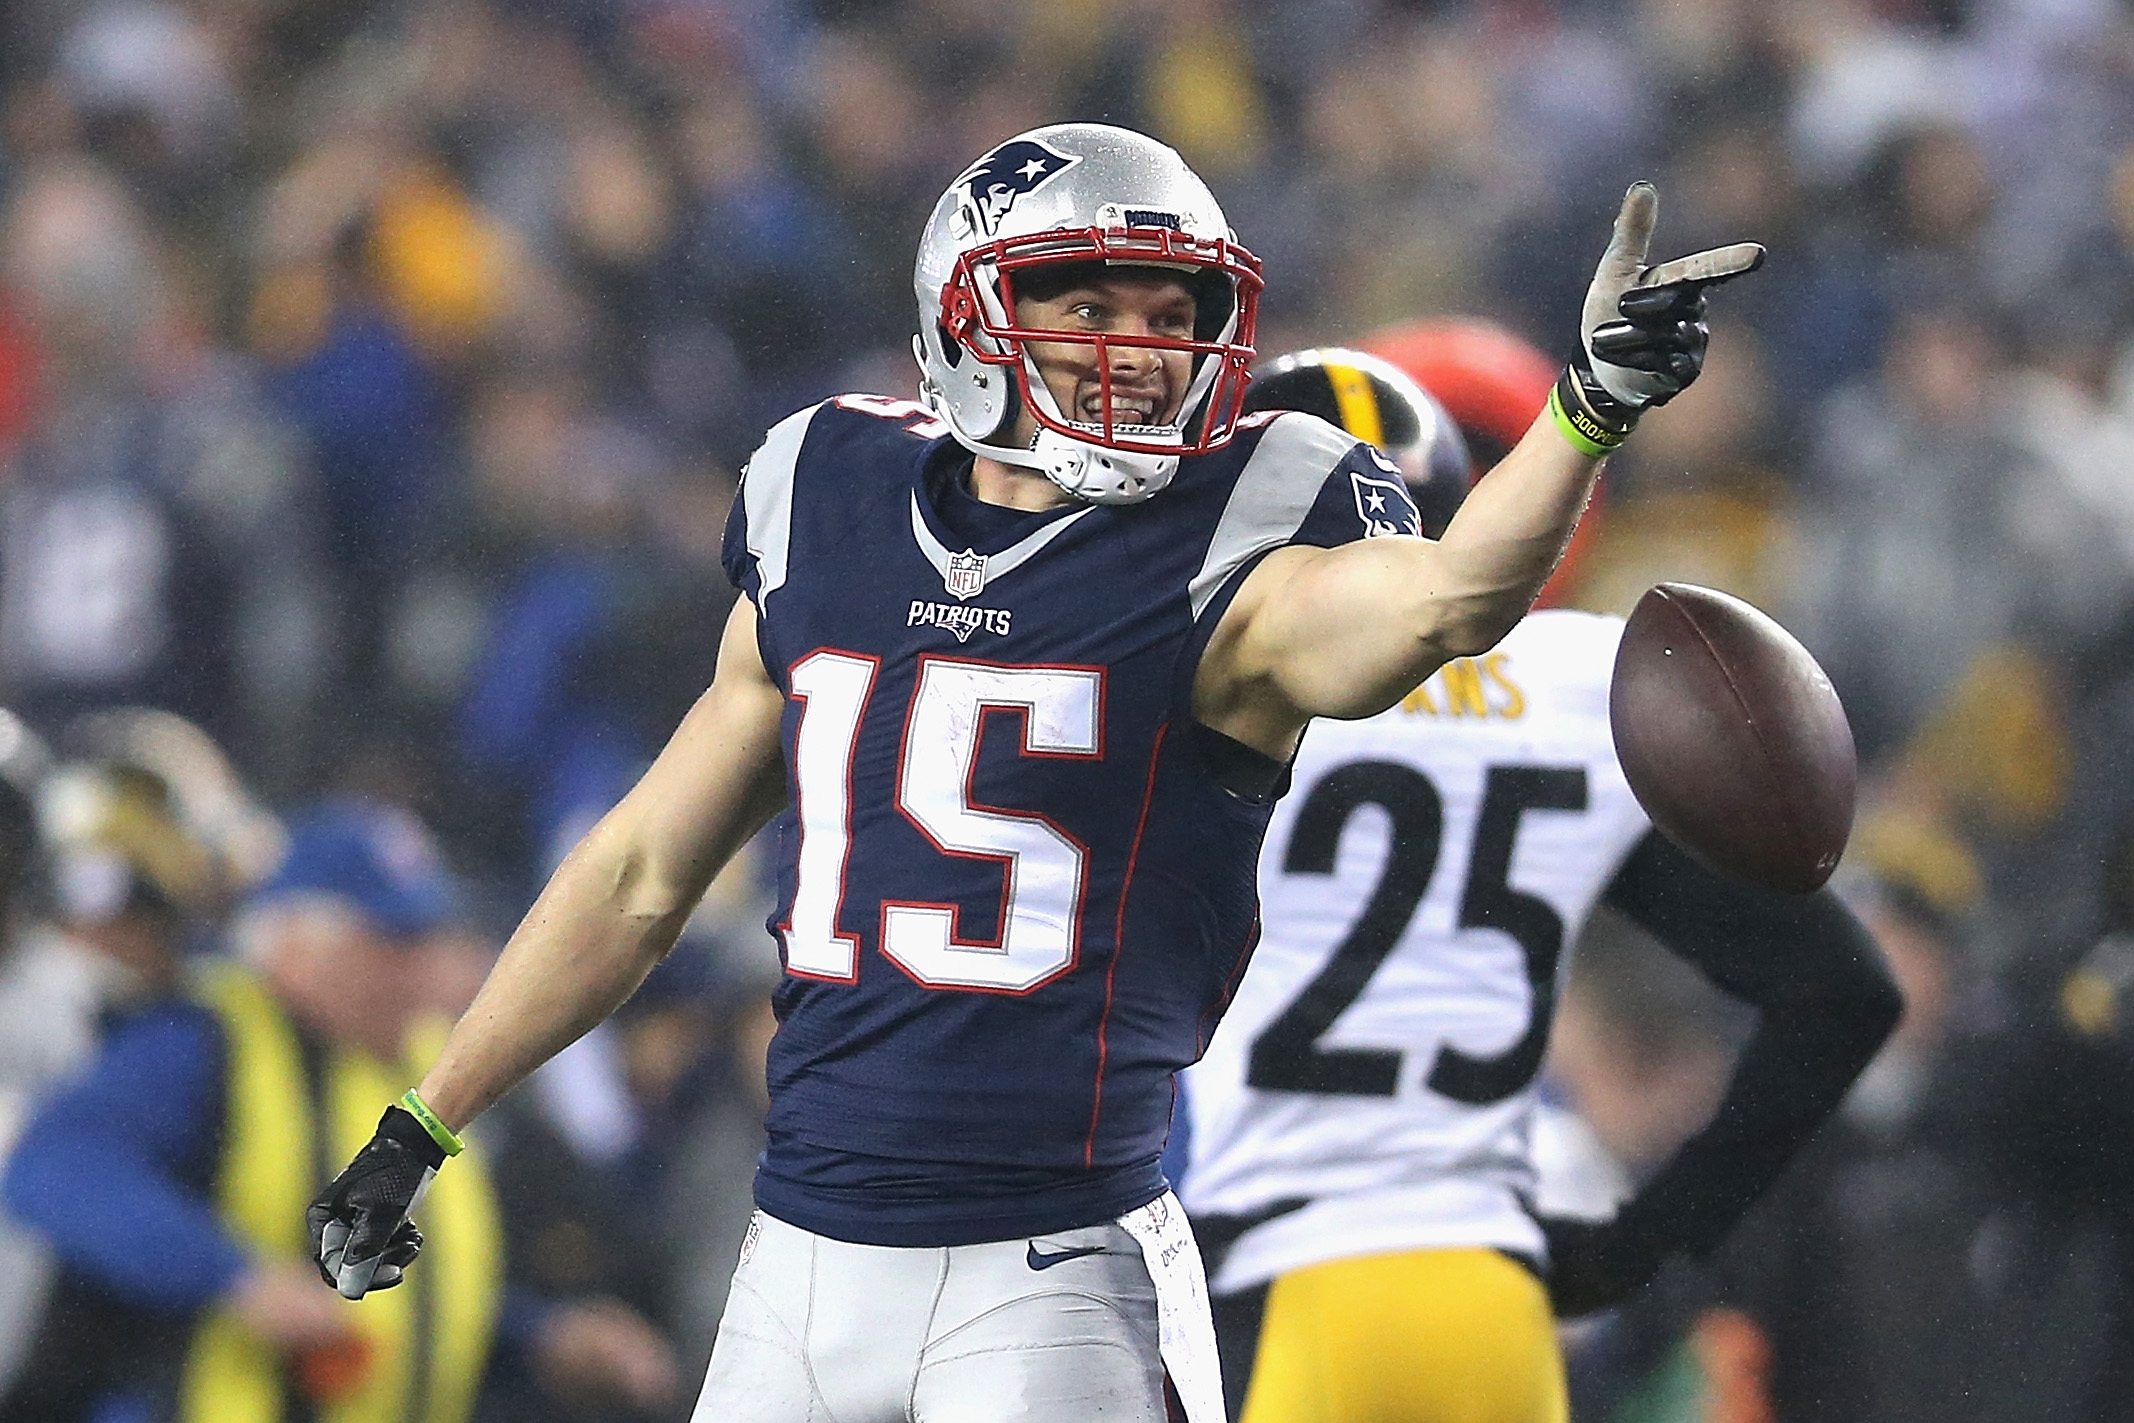 Chris Hogan gestures at the refs after they made a call.